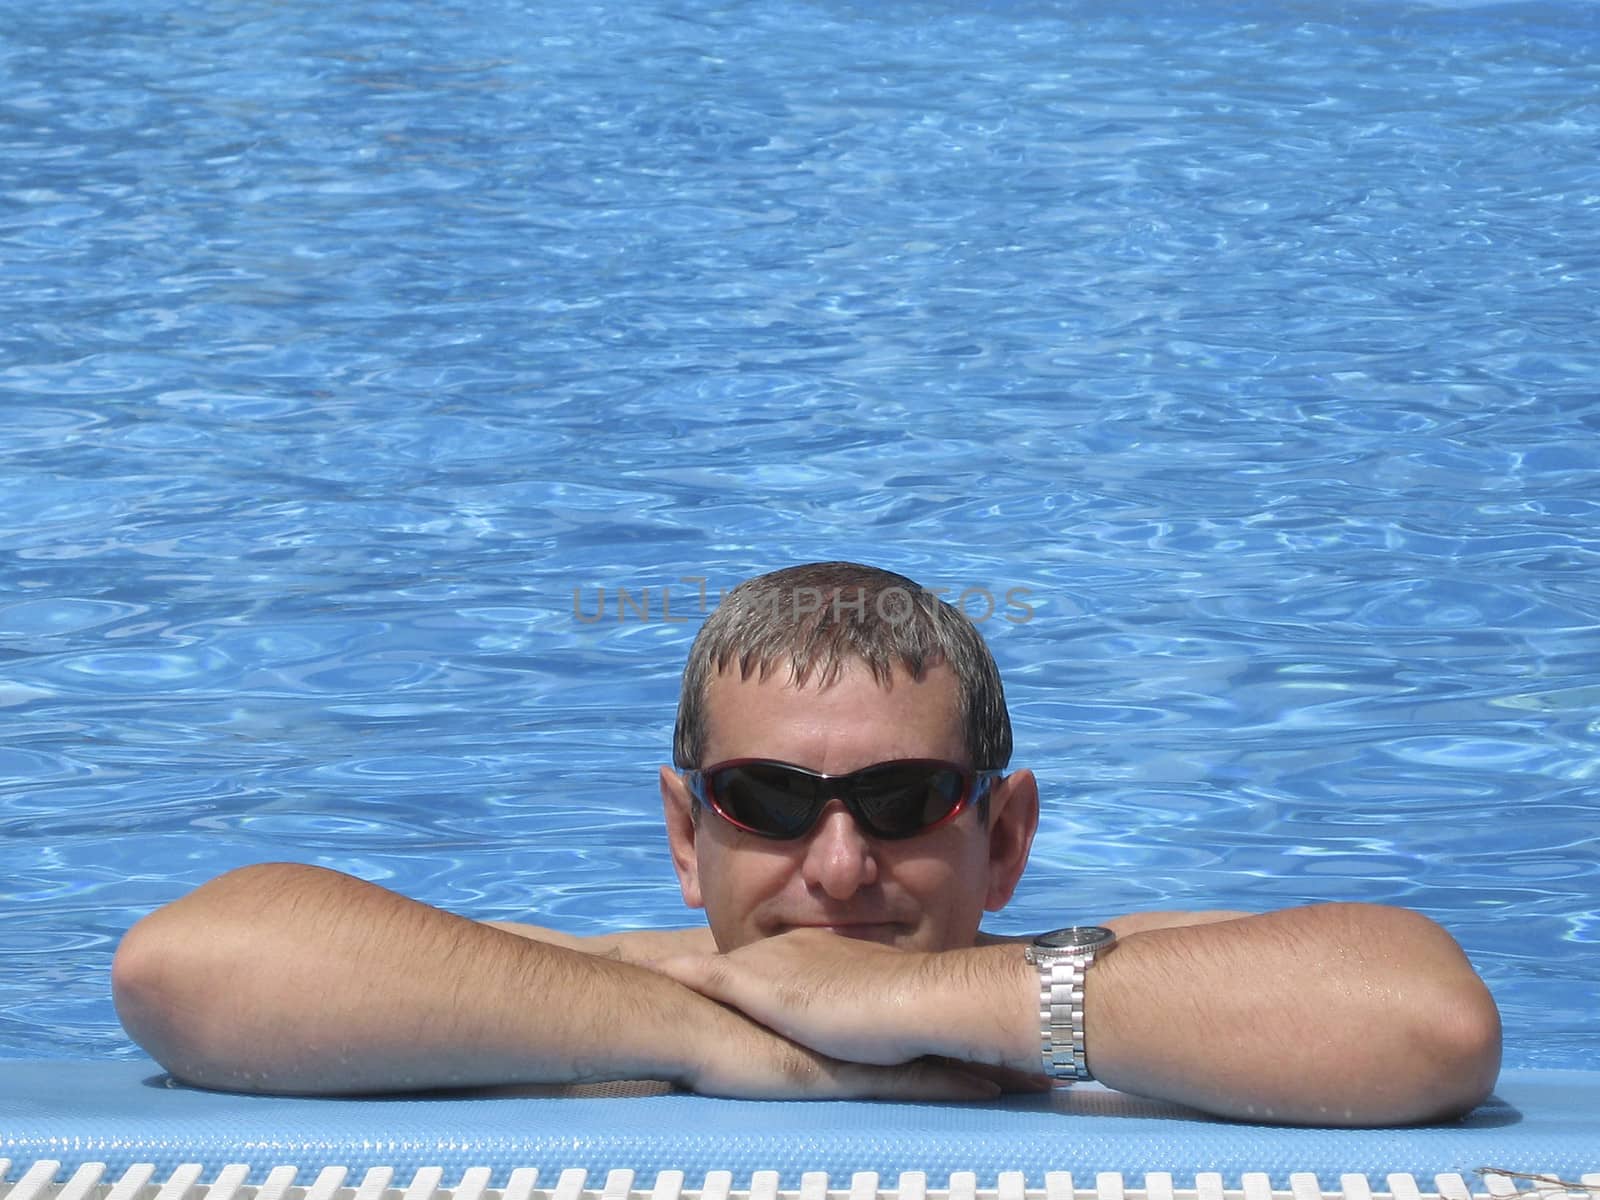 Man in swimming pool on Vacation